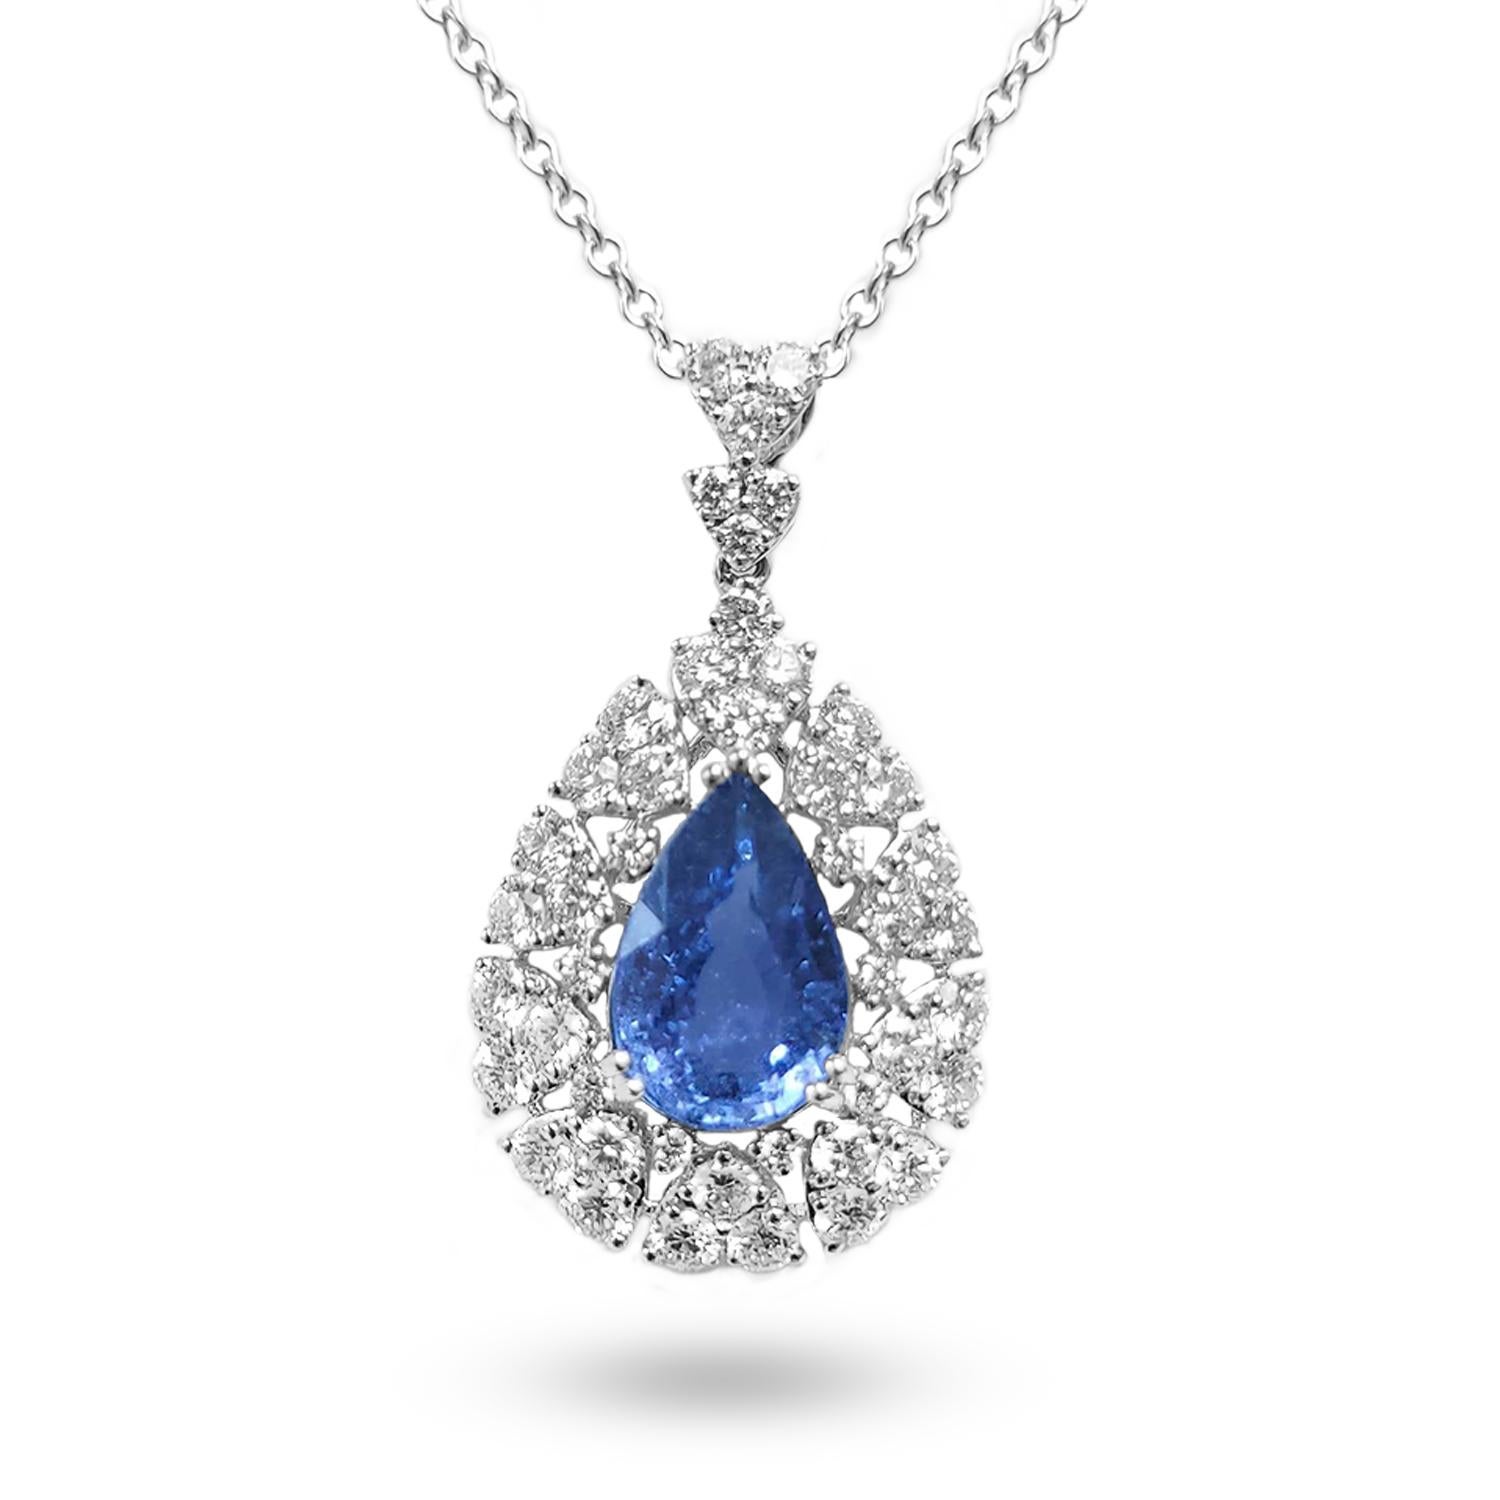 Lovely tear-drop/pear shaped sapphire pendant. Sapphire was NOT heated, and all natural.

Natural Sapphire: 4.14ct
Diamonds: 2.00ct
Chain Metal: 18k White Gold

Tag #: 17829